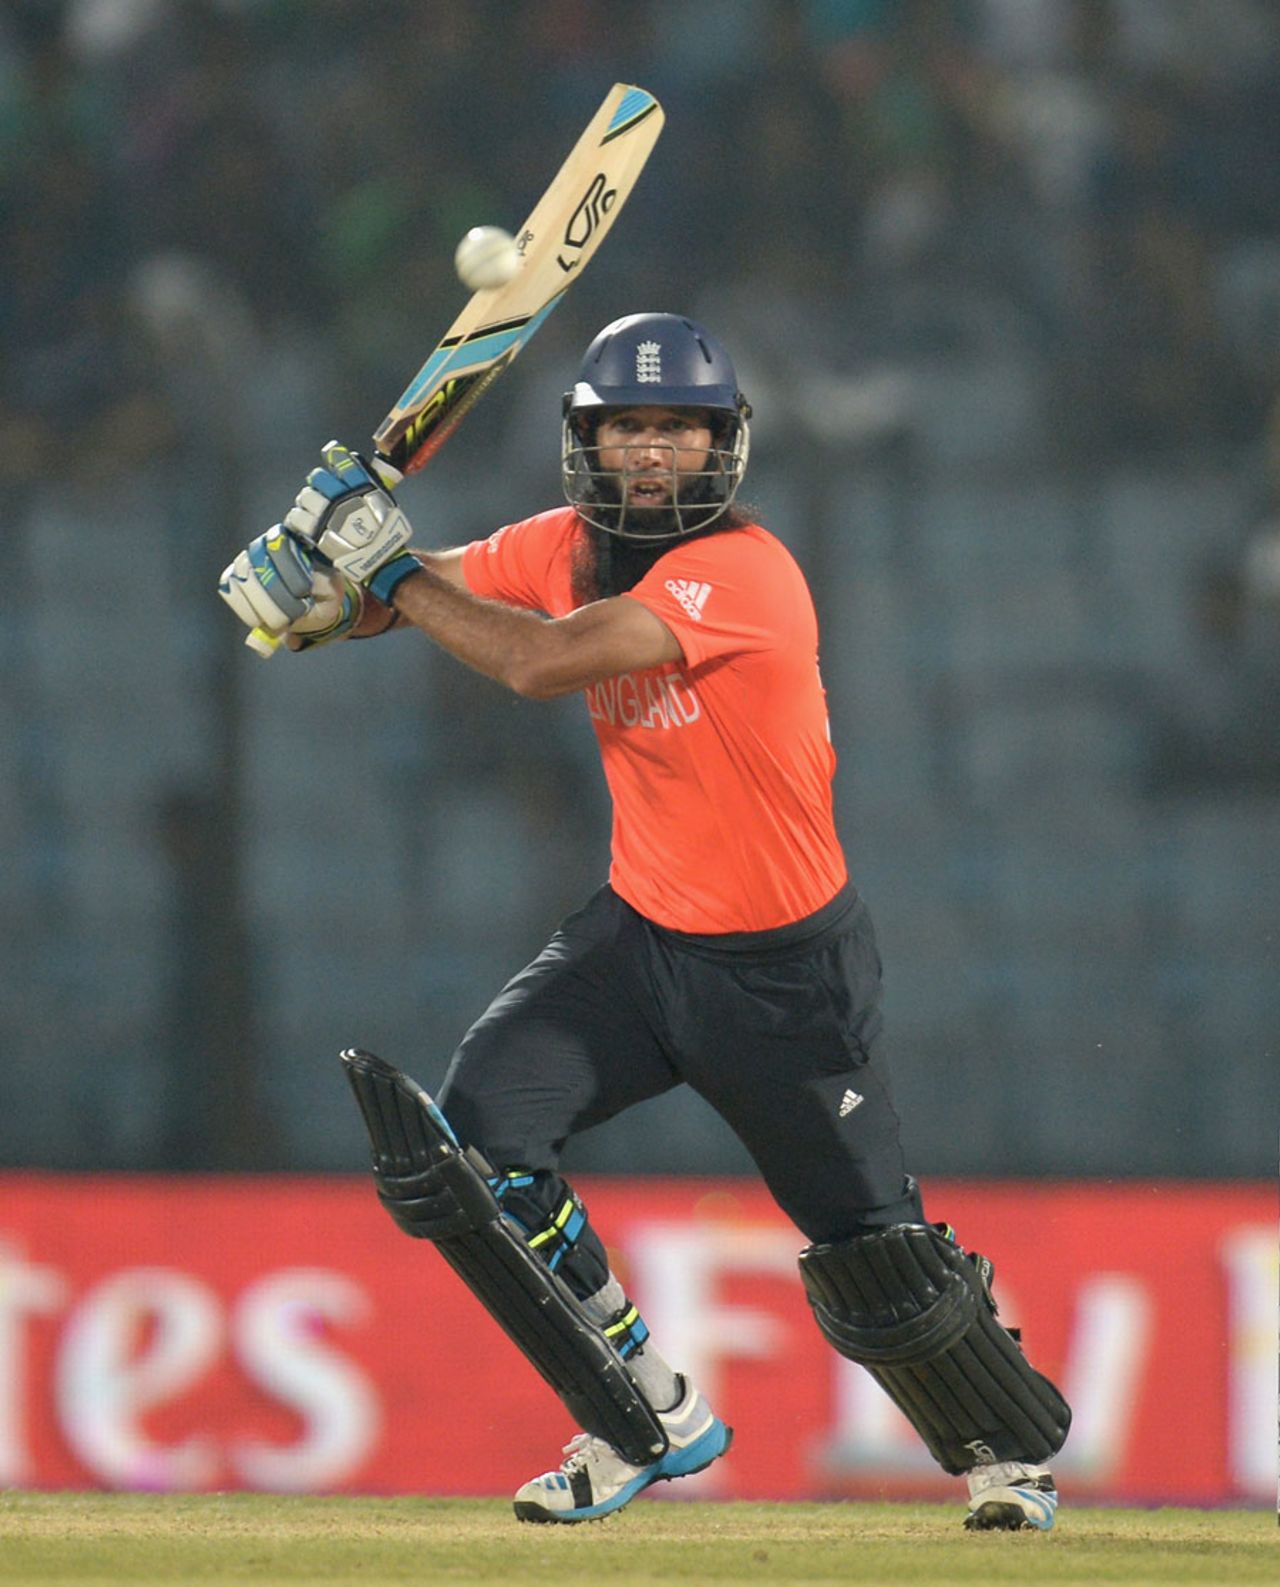 Moeen Ali gave England a quick start , England v New Zealand, World T20, Group 1, Chittagong, March 22, 2014